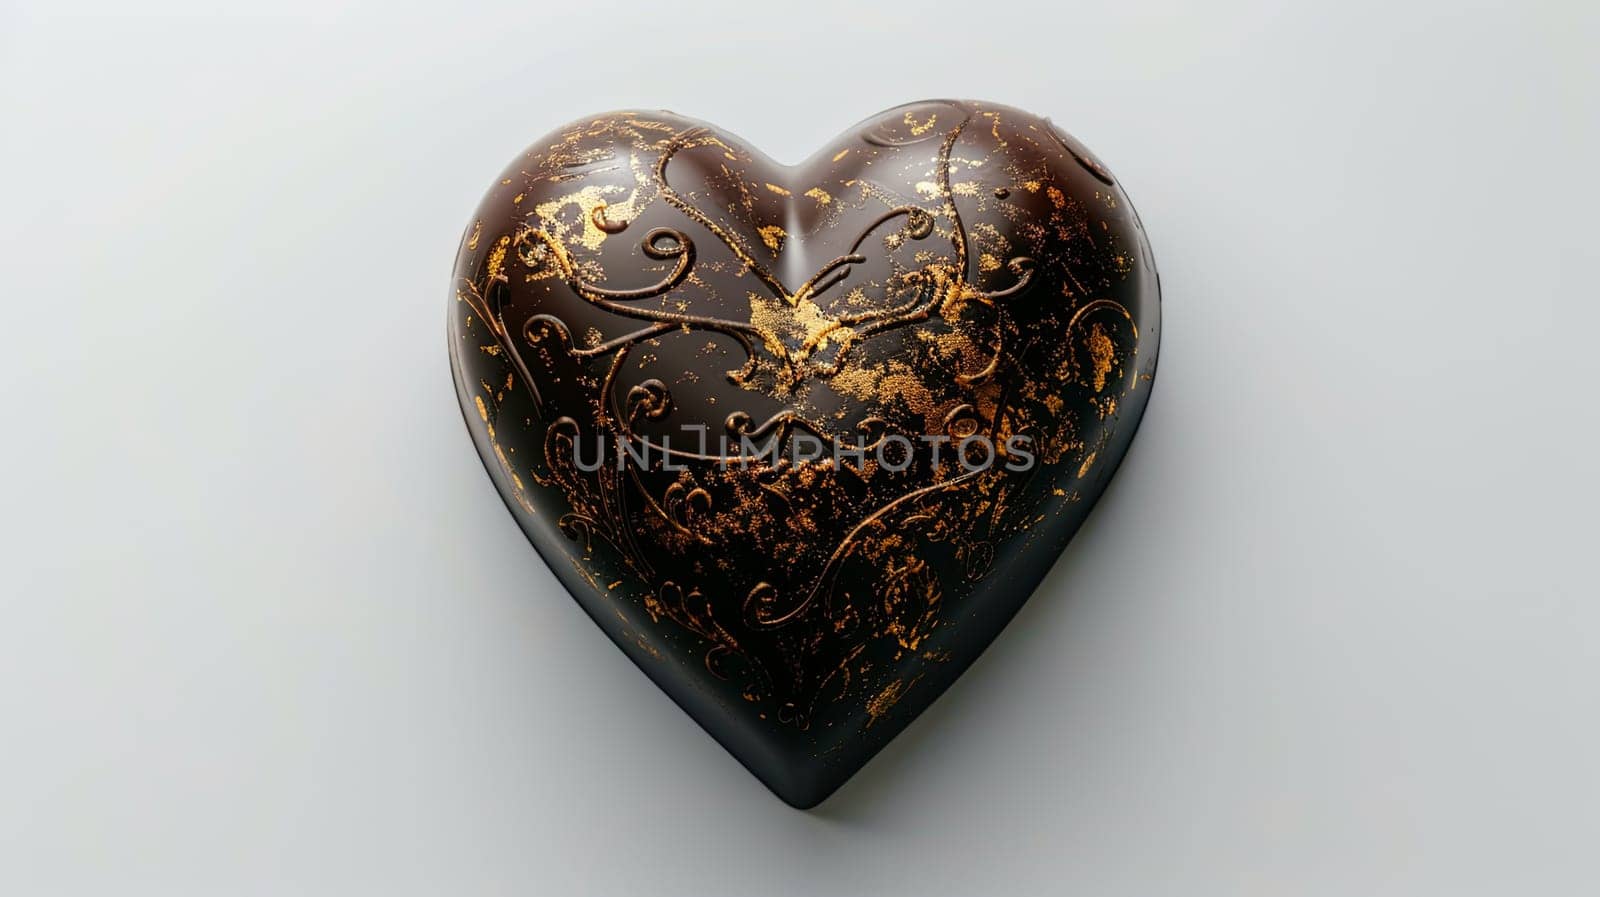 Heart-shaped chocolate box with golden accents sitting on a white table.